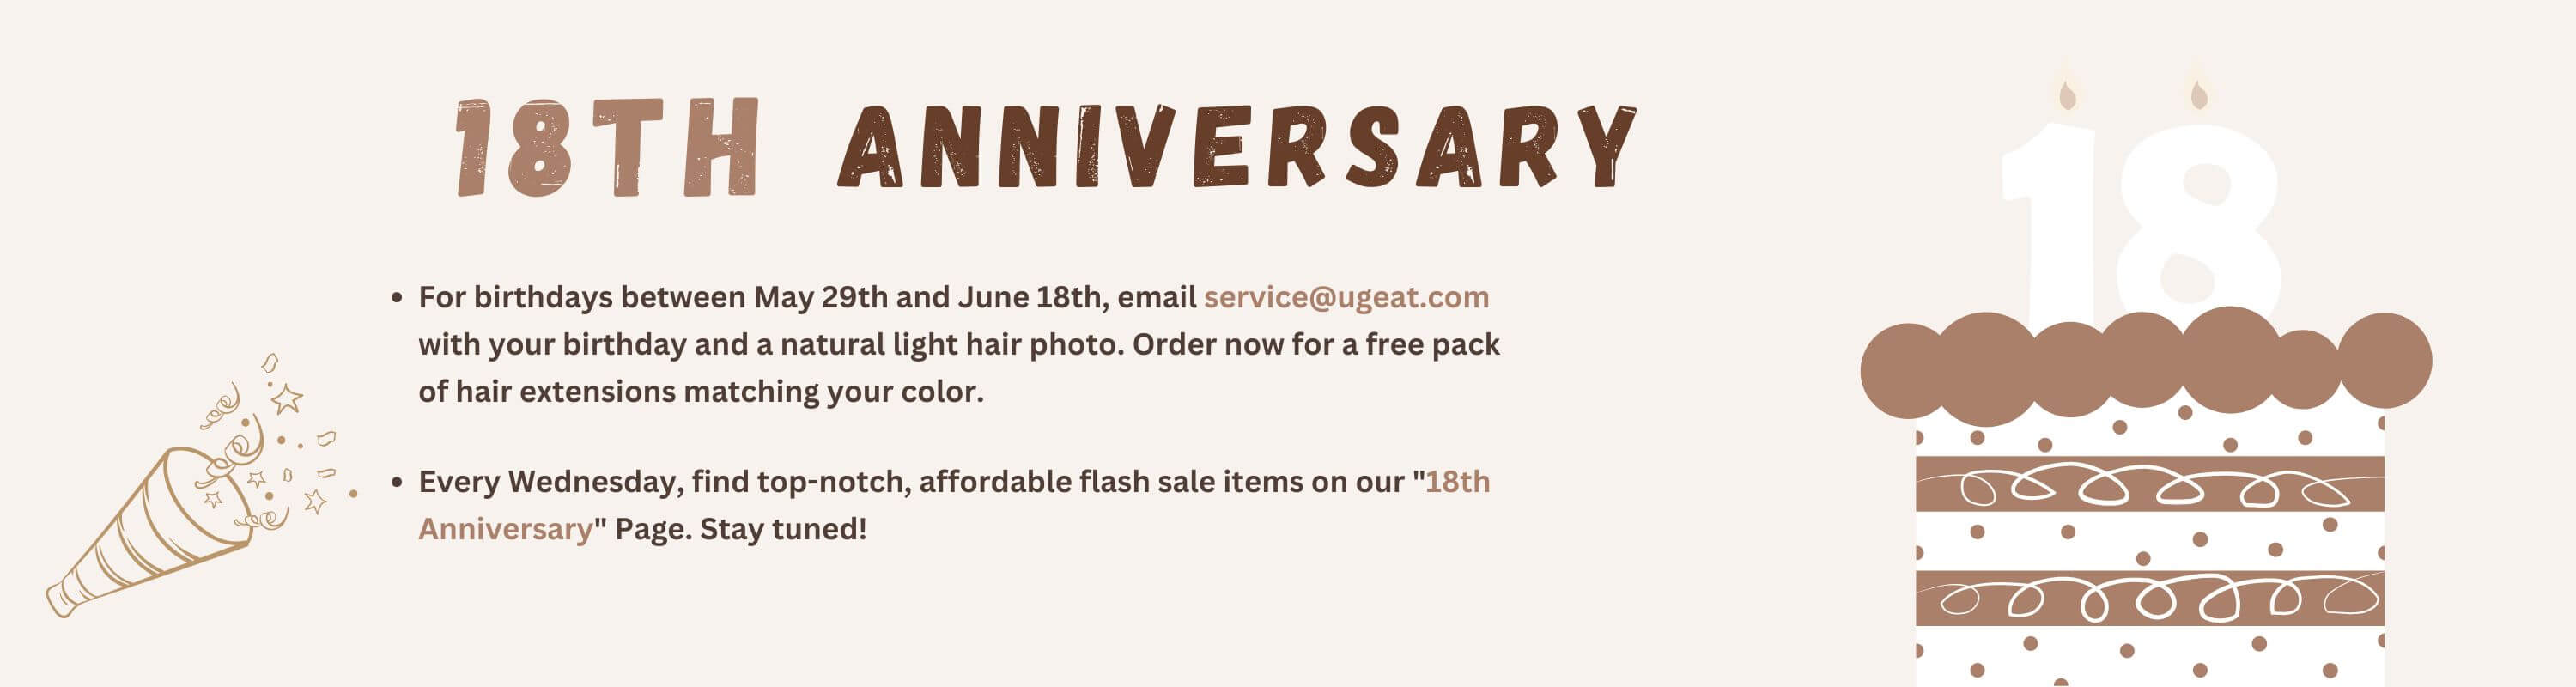 ugeat hair 18th anniversary sale